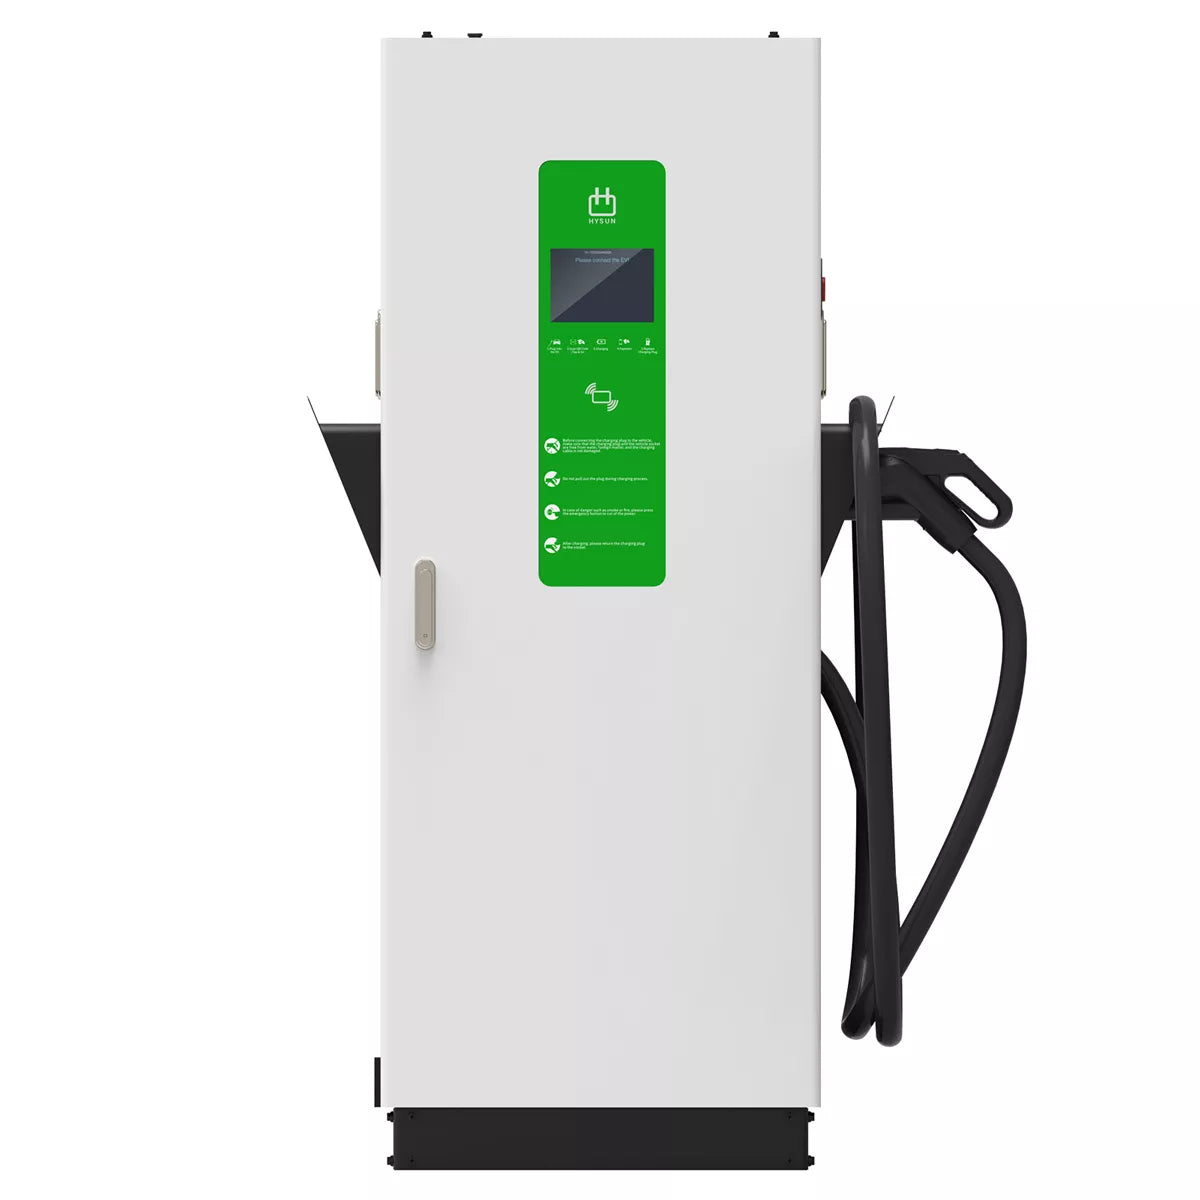 Commercial DC Fast EV Charger